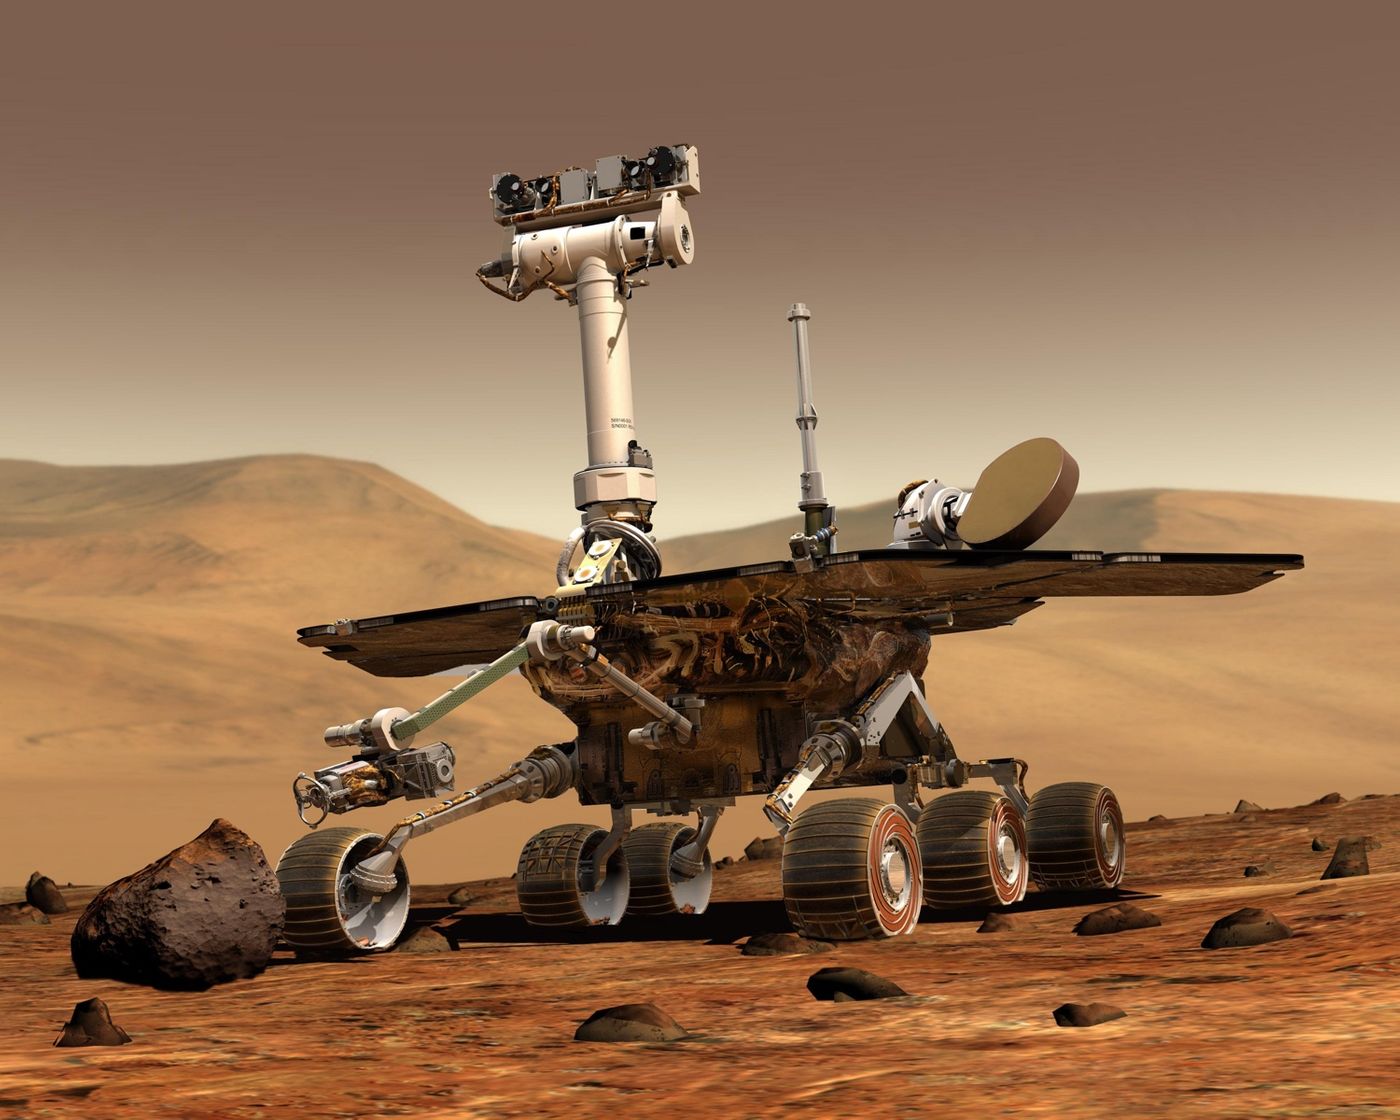 An artist's impression of the Opportunity rover on Mars.